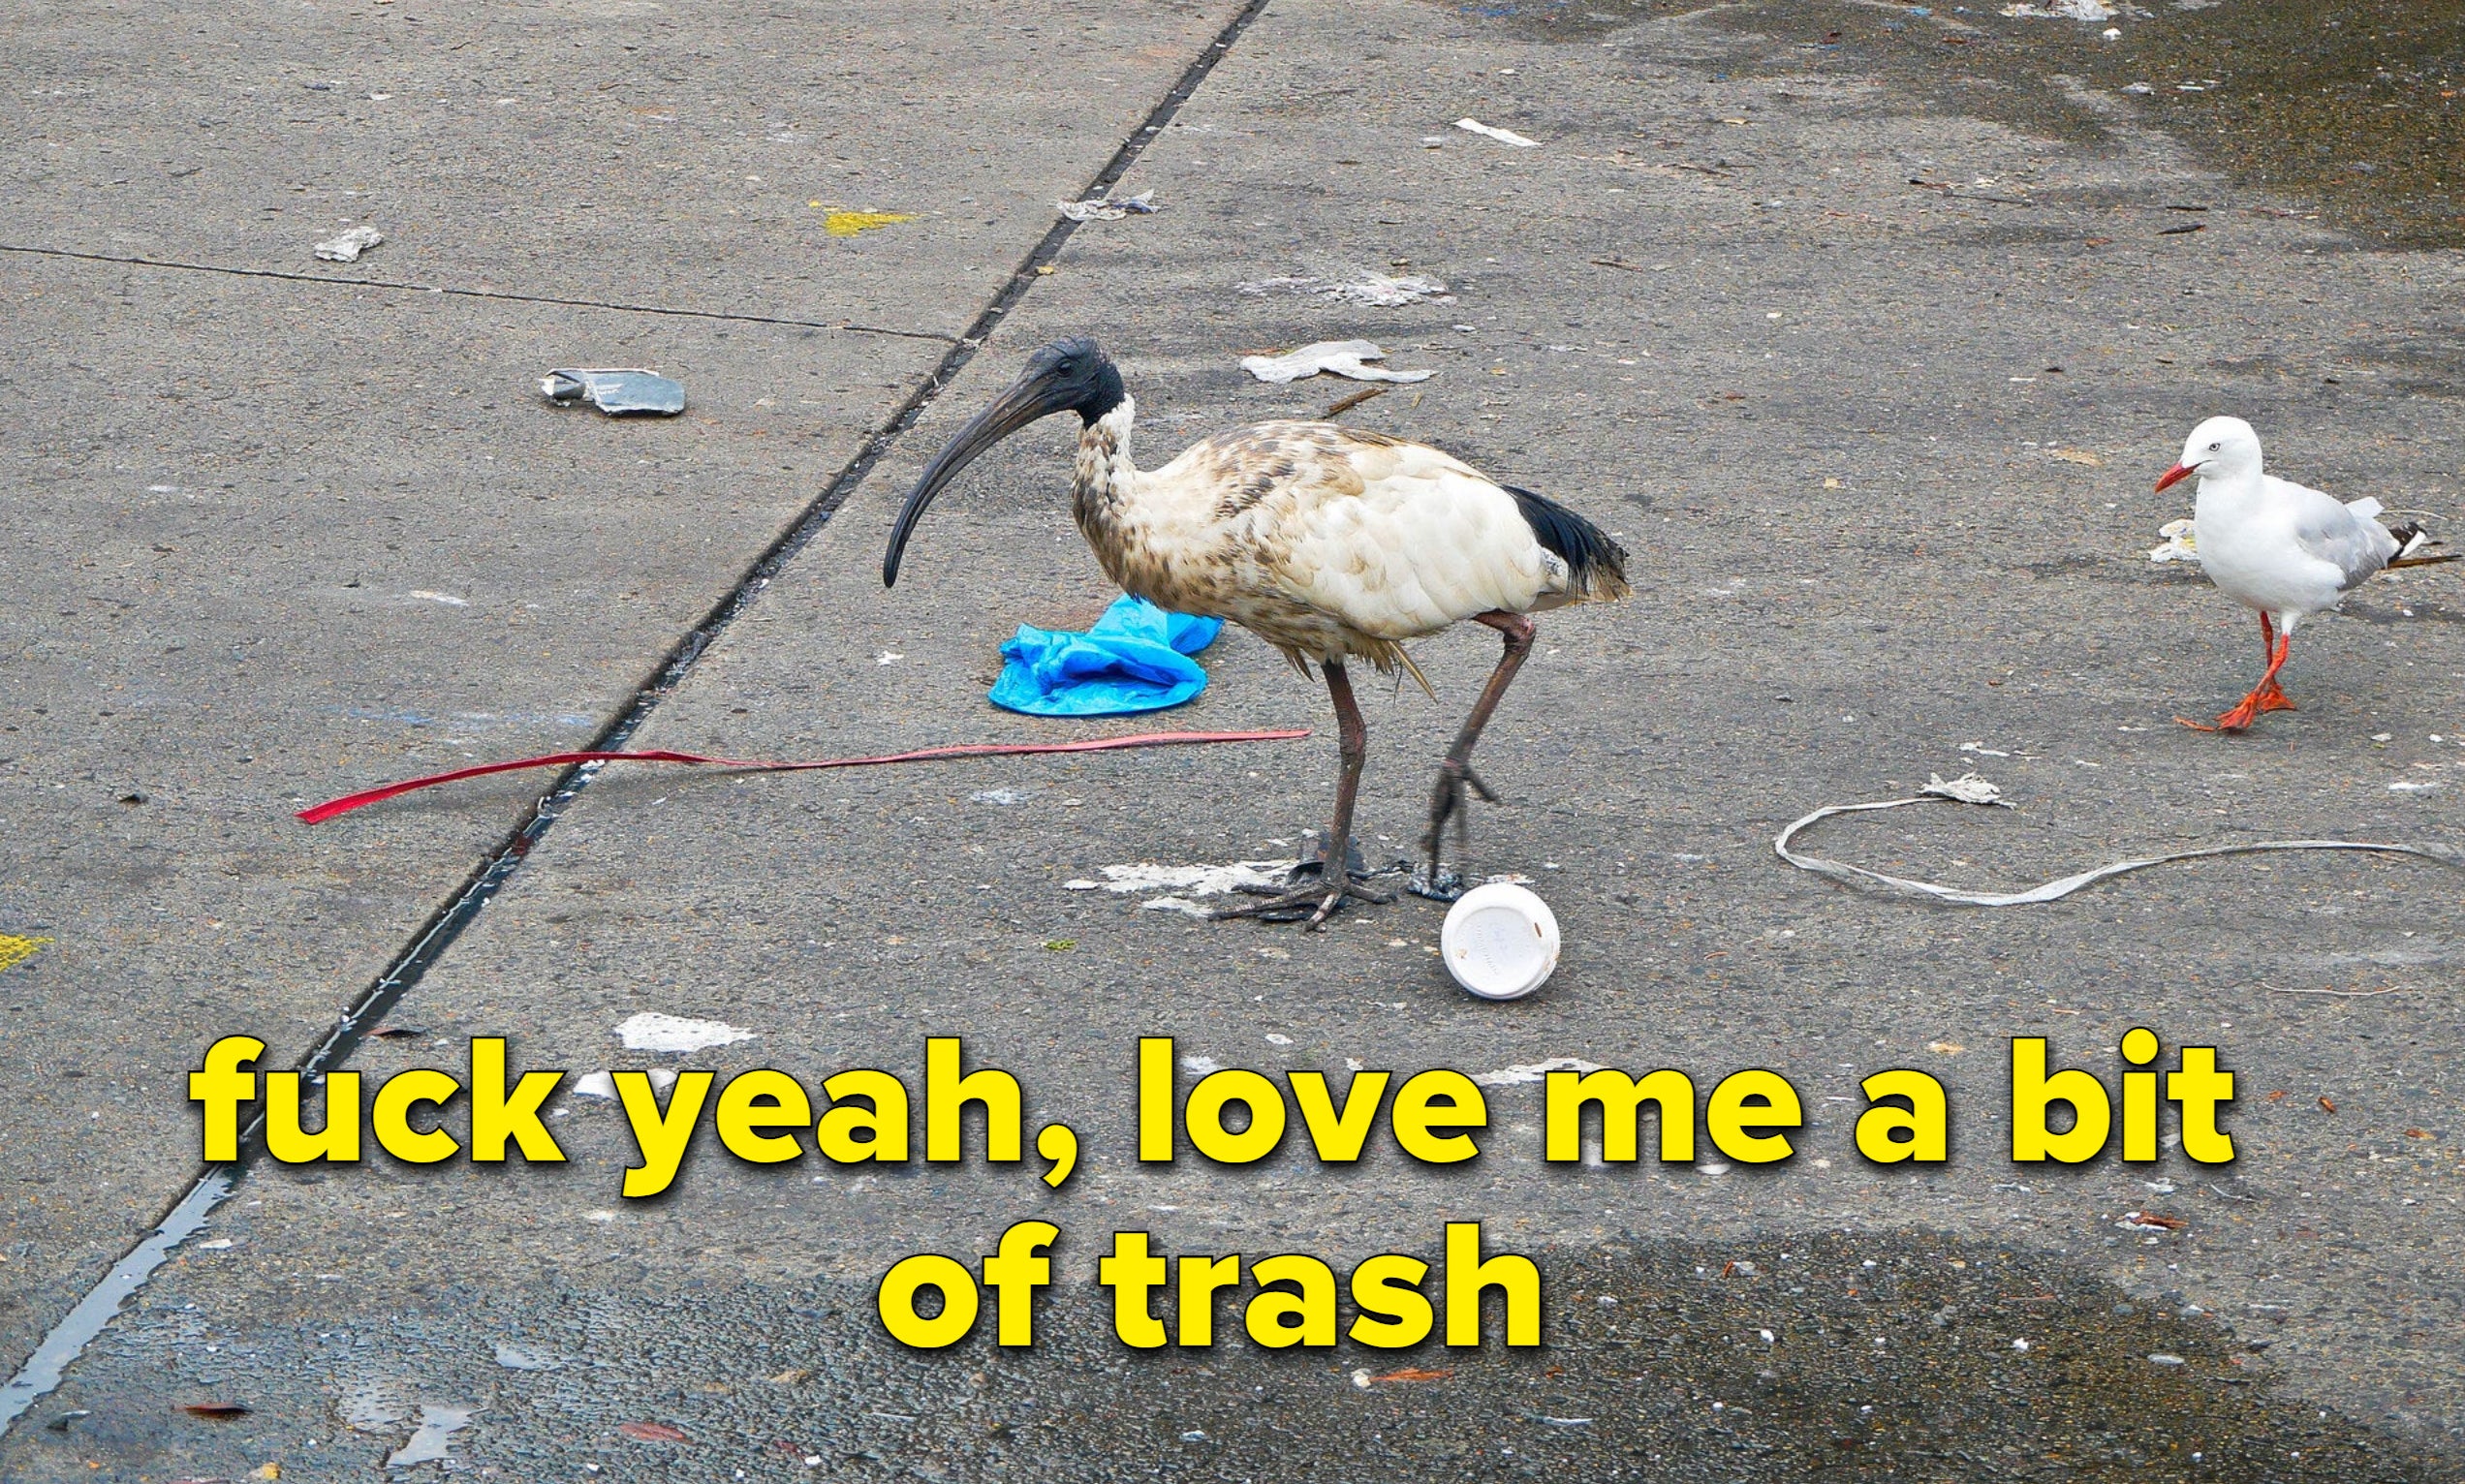 An ibis bird standing in the middle of a mess of trash with the caption &quot;fuck yeah, love me a bit of trash&quot;